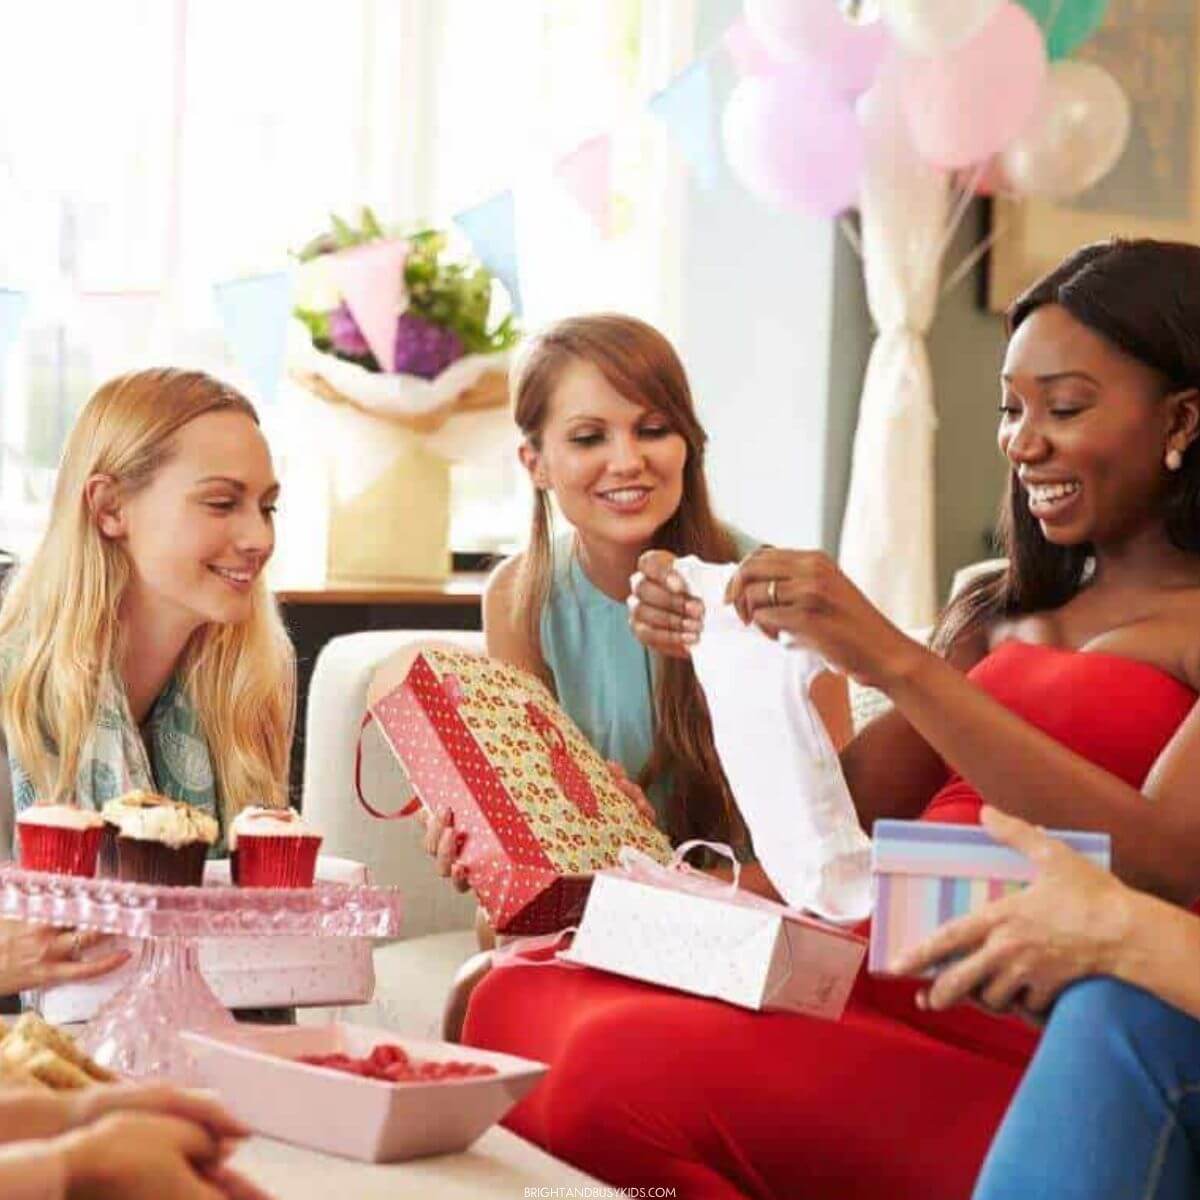 Most Forgotten Baby Shower Gifts Parents Need